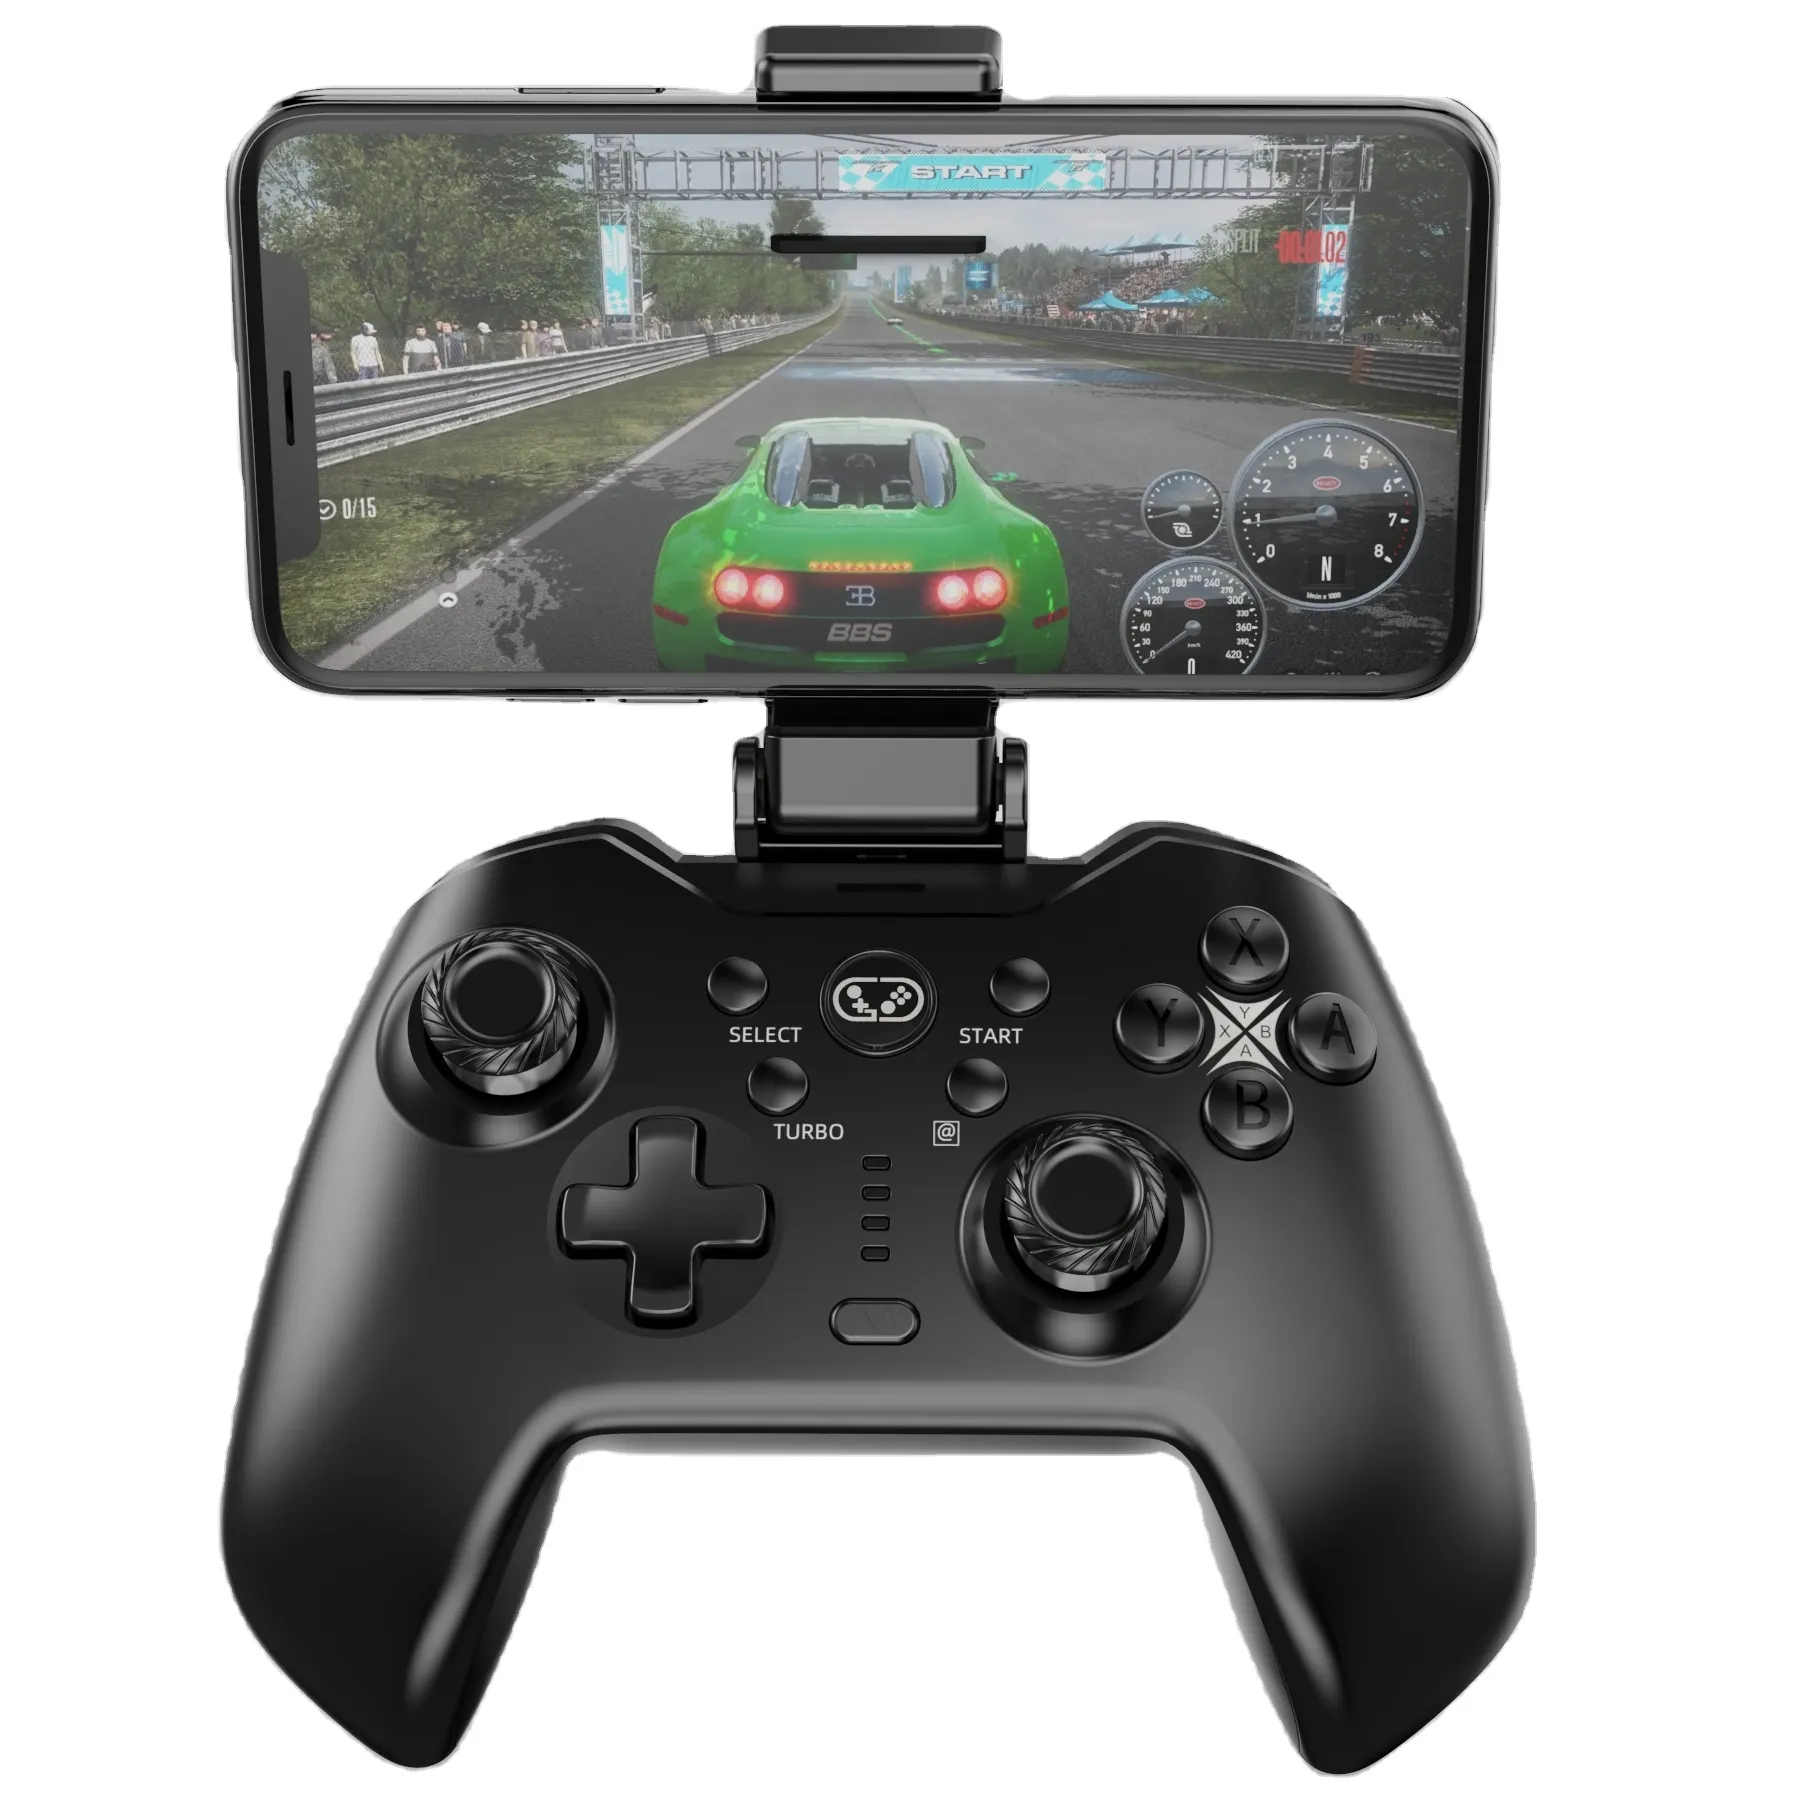 Handy-Game controller für Nintendo Switch/Android/iOS/PC/PS3/PS4/XBOX360